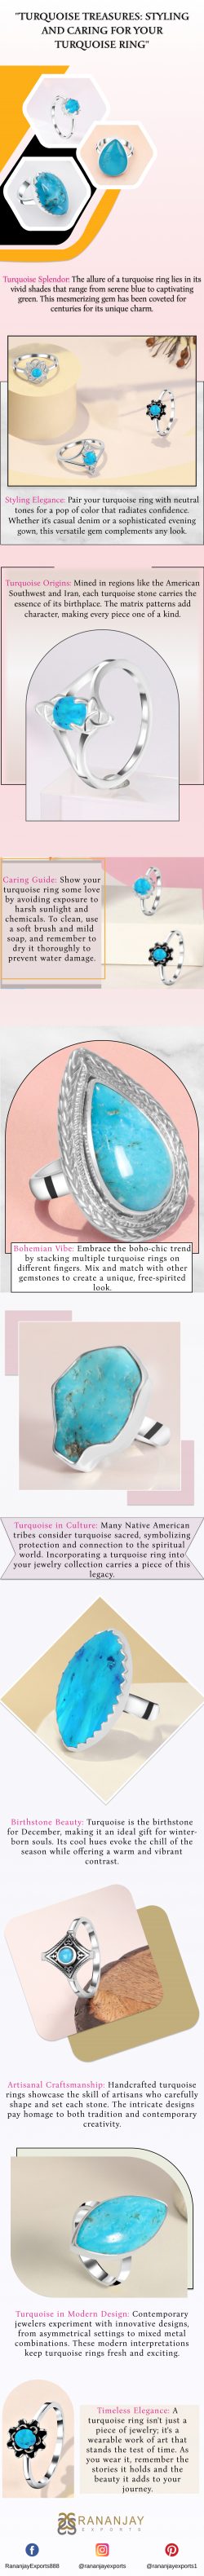 “Turquoise Treasures: Styling and Caring for Your Turquoise Ring”